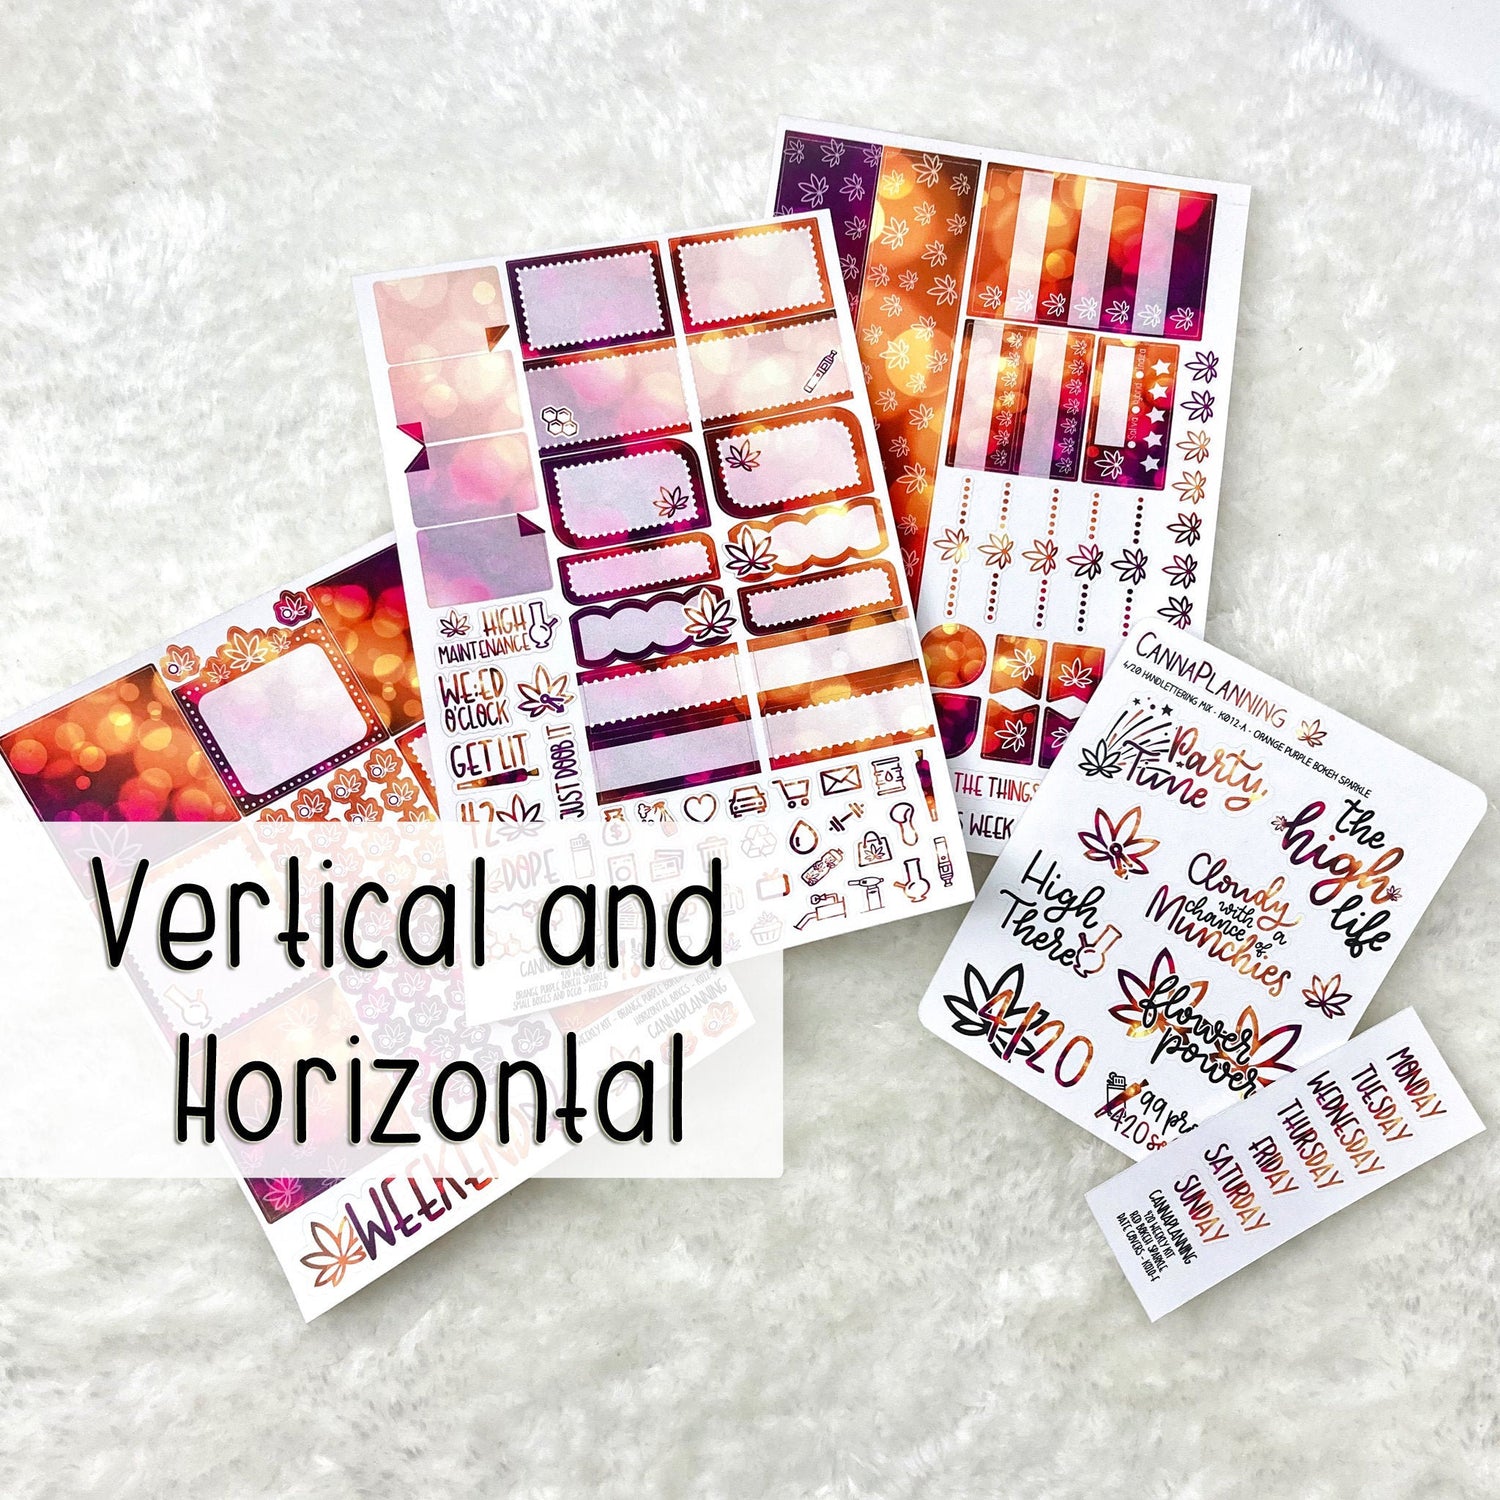 420 Weekly Sticker Kit - VERTICAL AND HORIZONTAL - Orange Purple Bokeh Sparkle | weed and cannabis planner sticker kit and scrapbook (6596138598577)